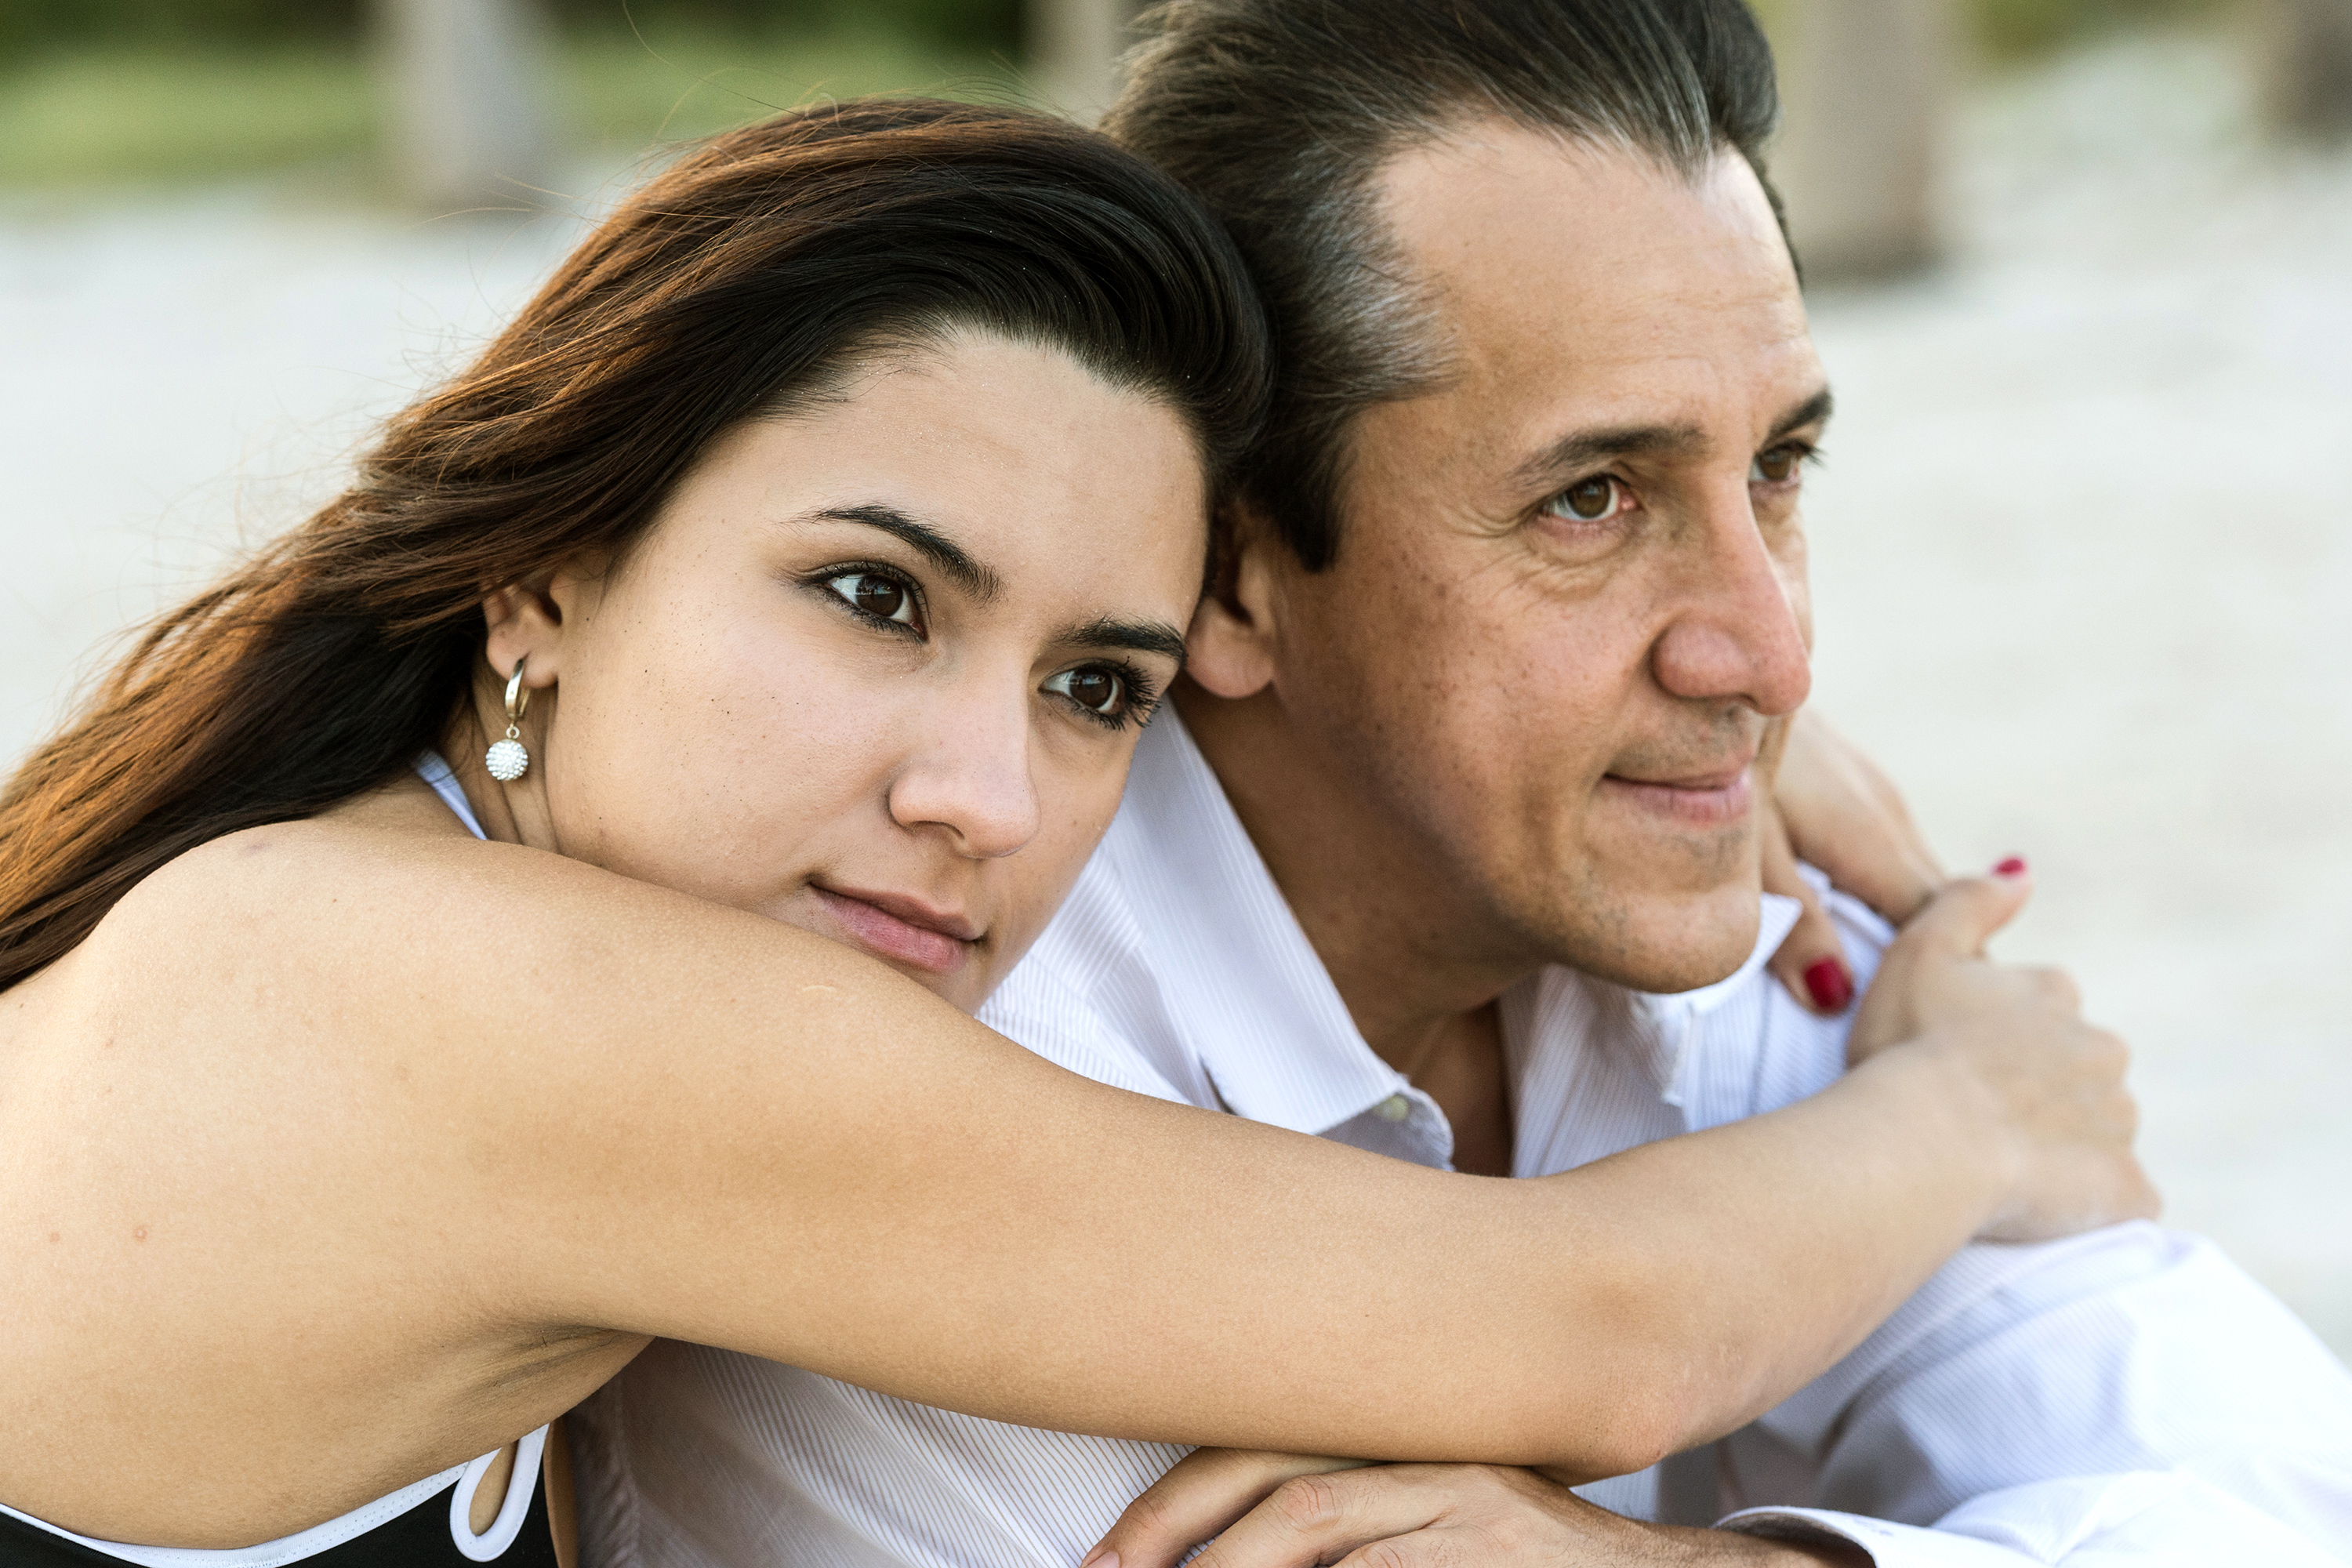 Daddy Issues: Causes, Impact and How to Heal